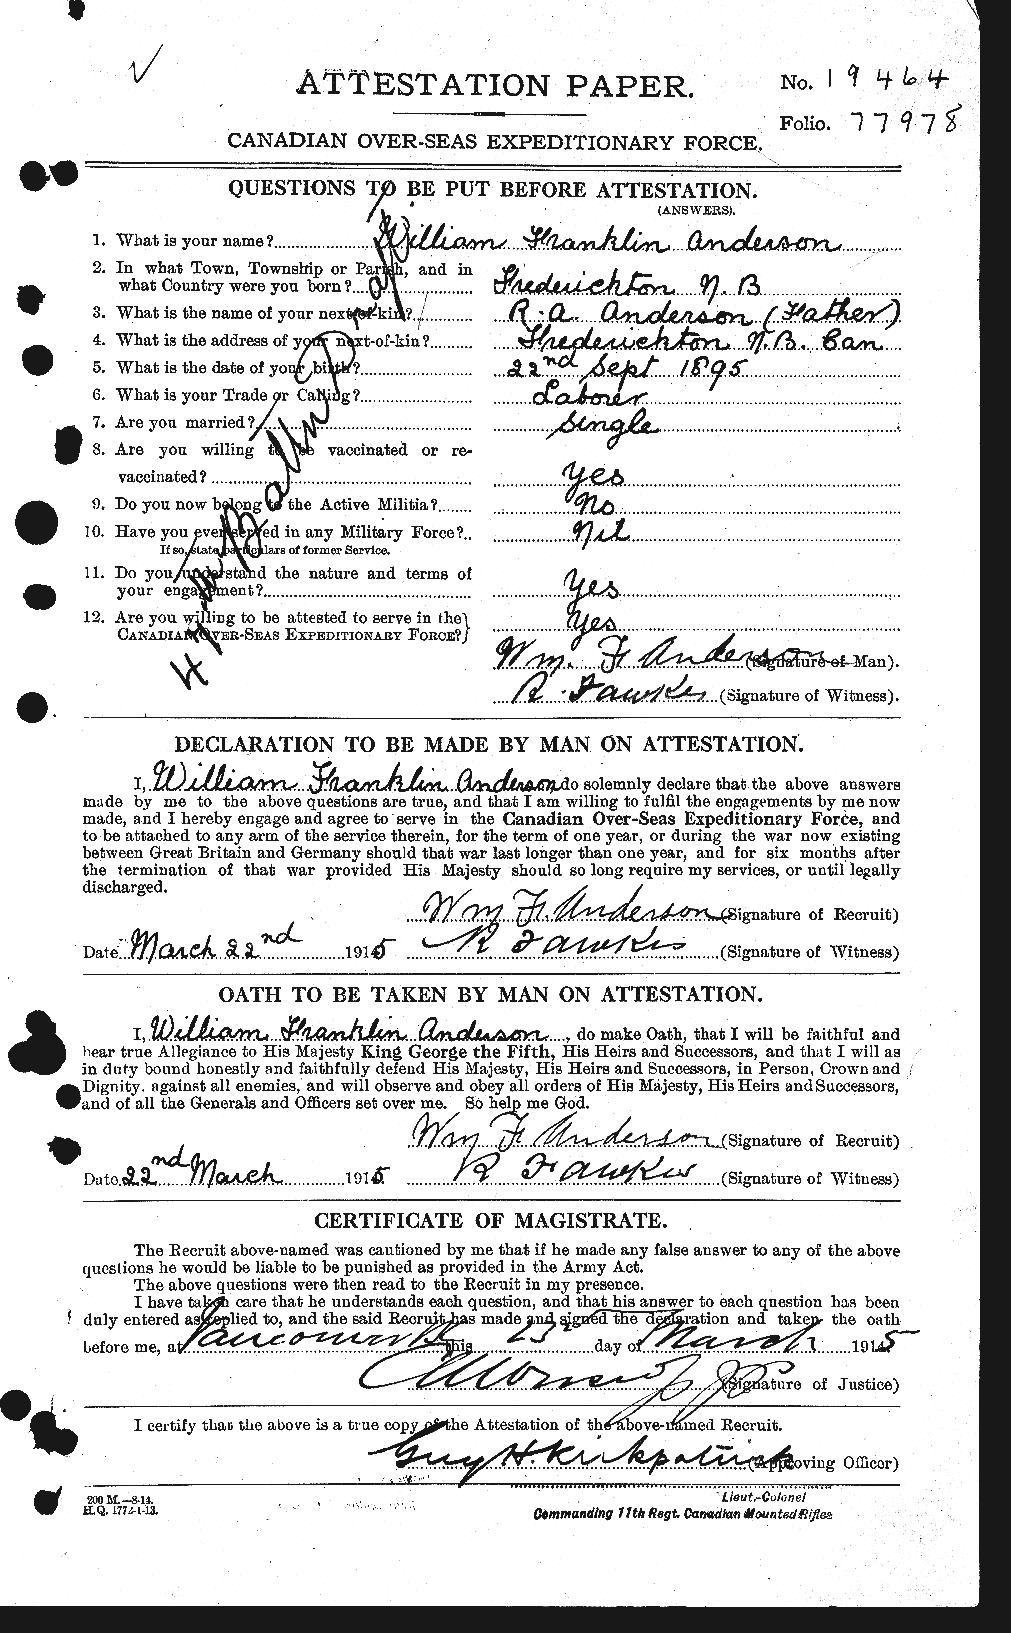 Personnel Records of the First World War - CEF 210724a